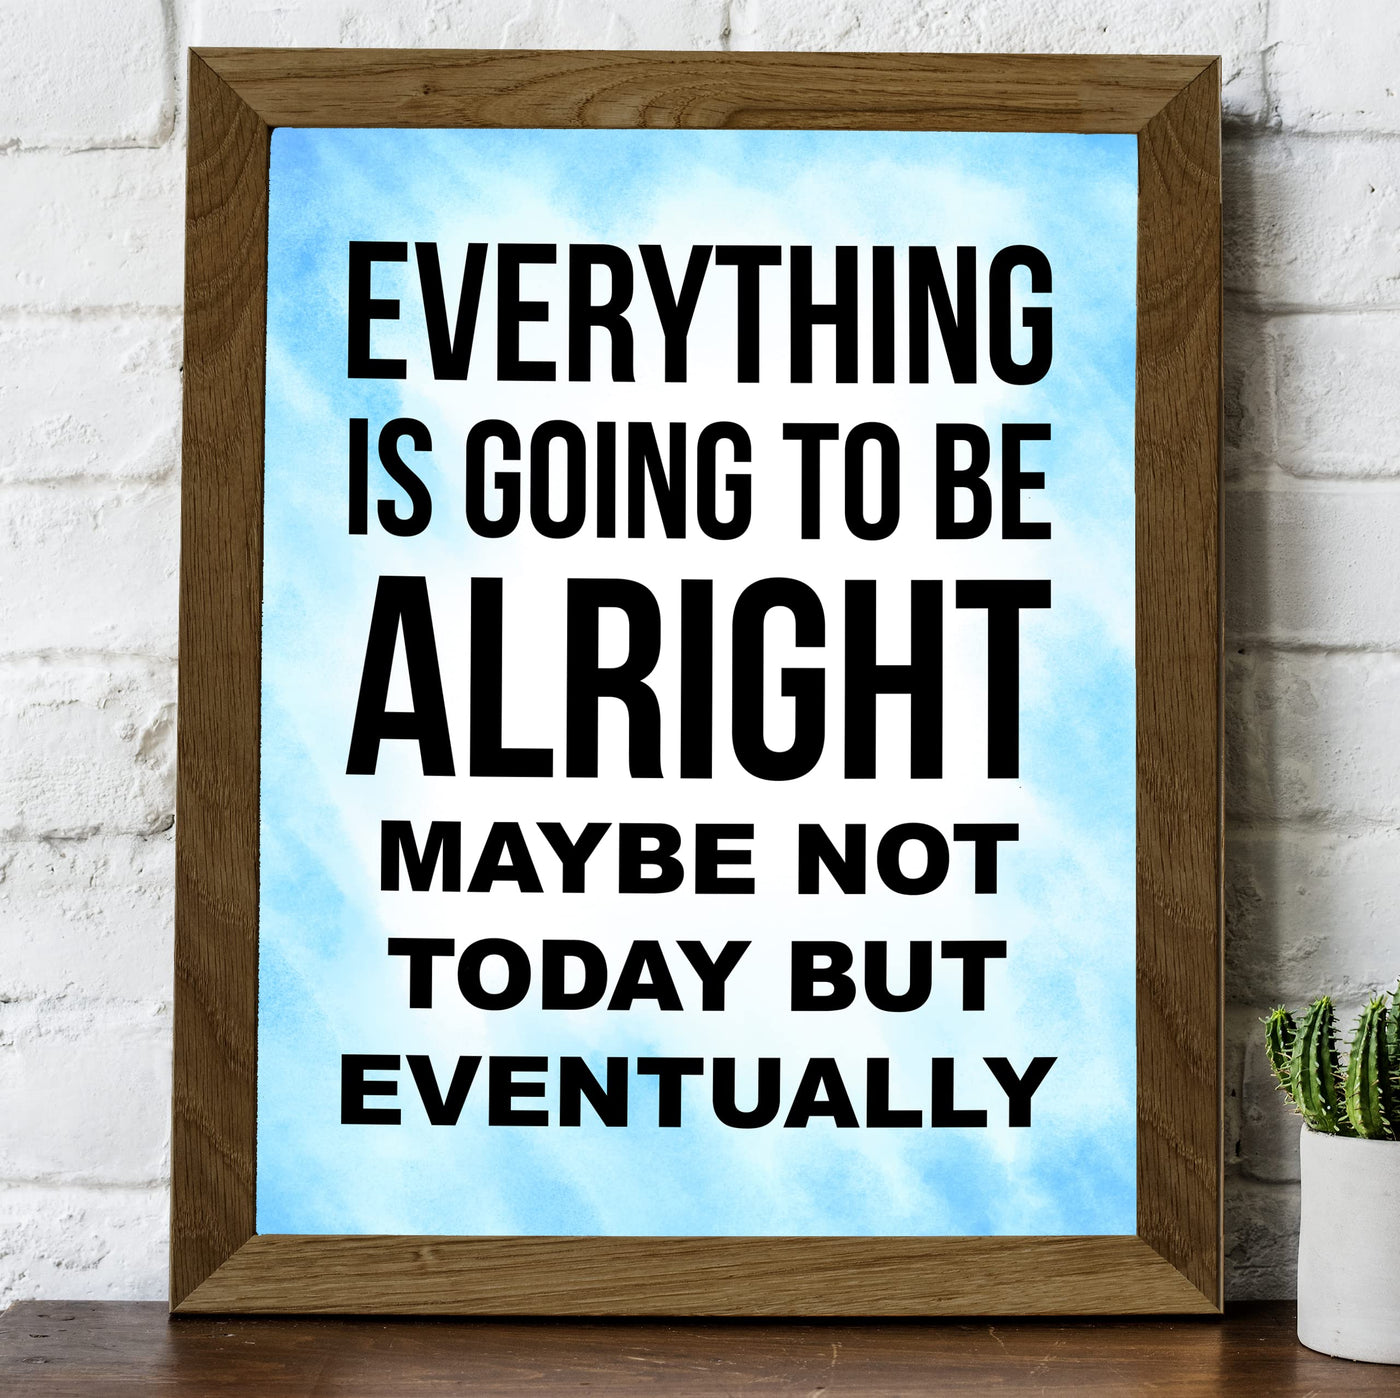 Everything Is Going to Be Alright Inspirational Quotes Wall Art -8 x 10" Motivational Typography Print -Ready to Frame. Positive Decoration for Home-Office-School Decor. Great Gift and Reminder!